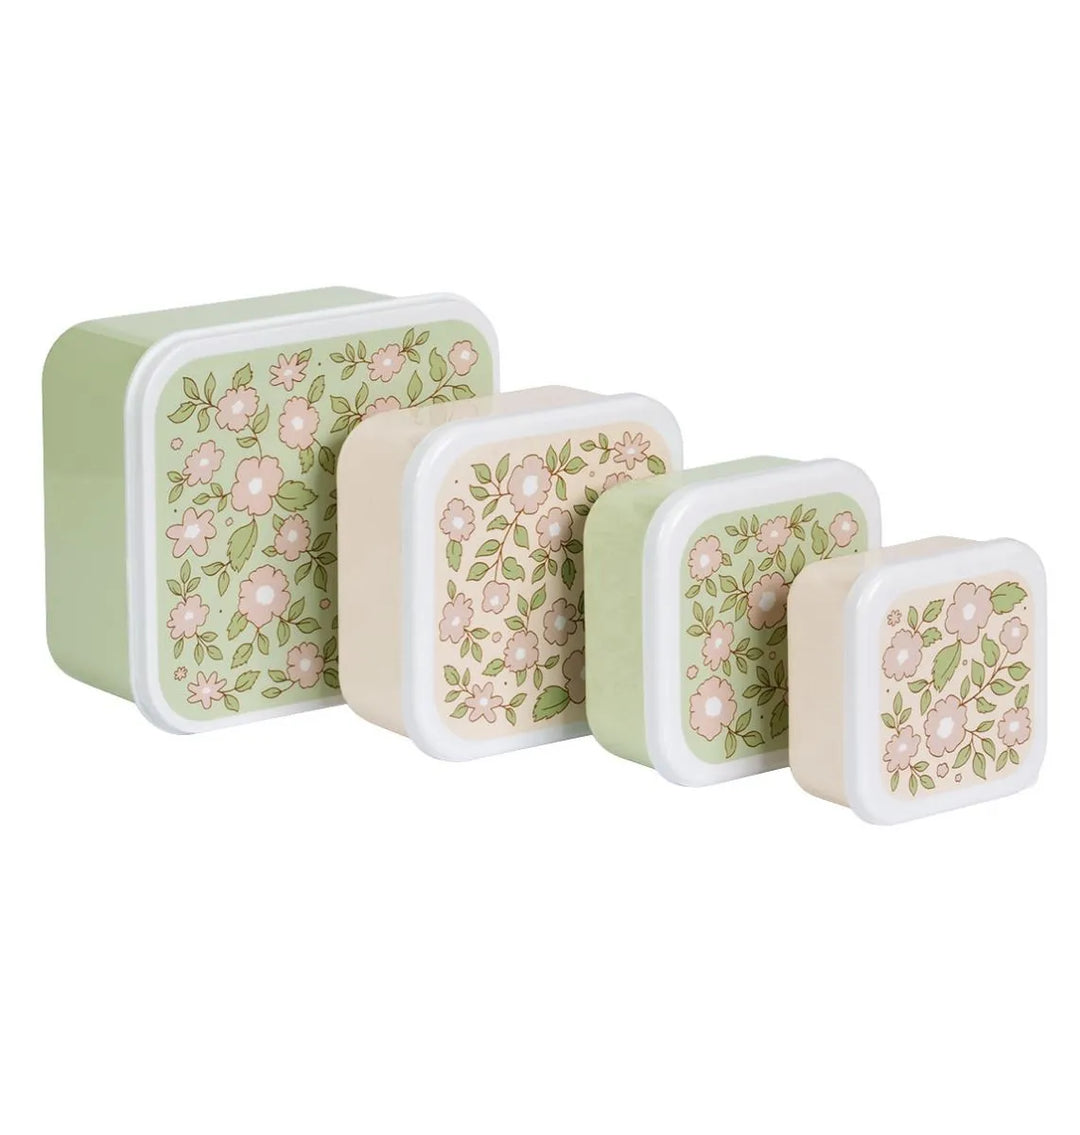 A Little Lovely Company - Lunch & Snack Box Set - Blossoms